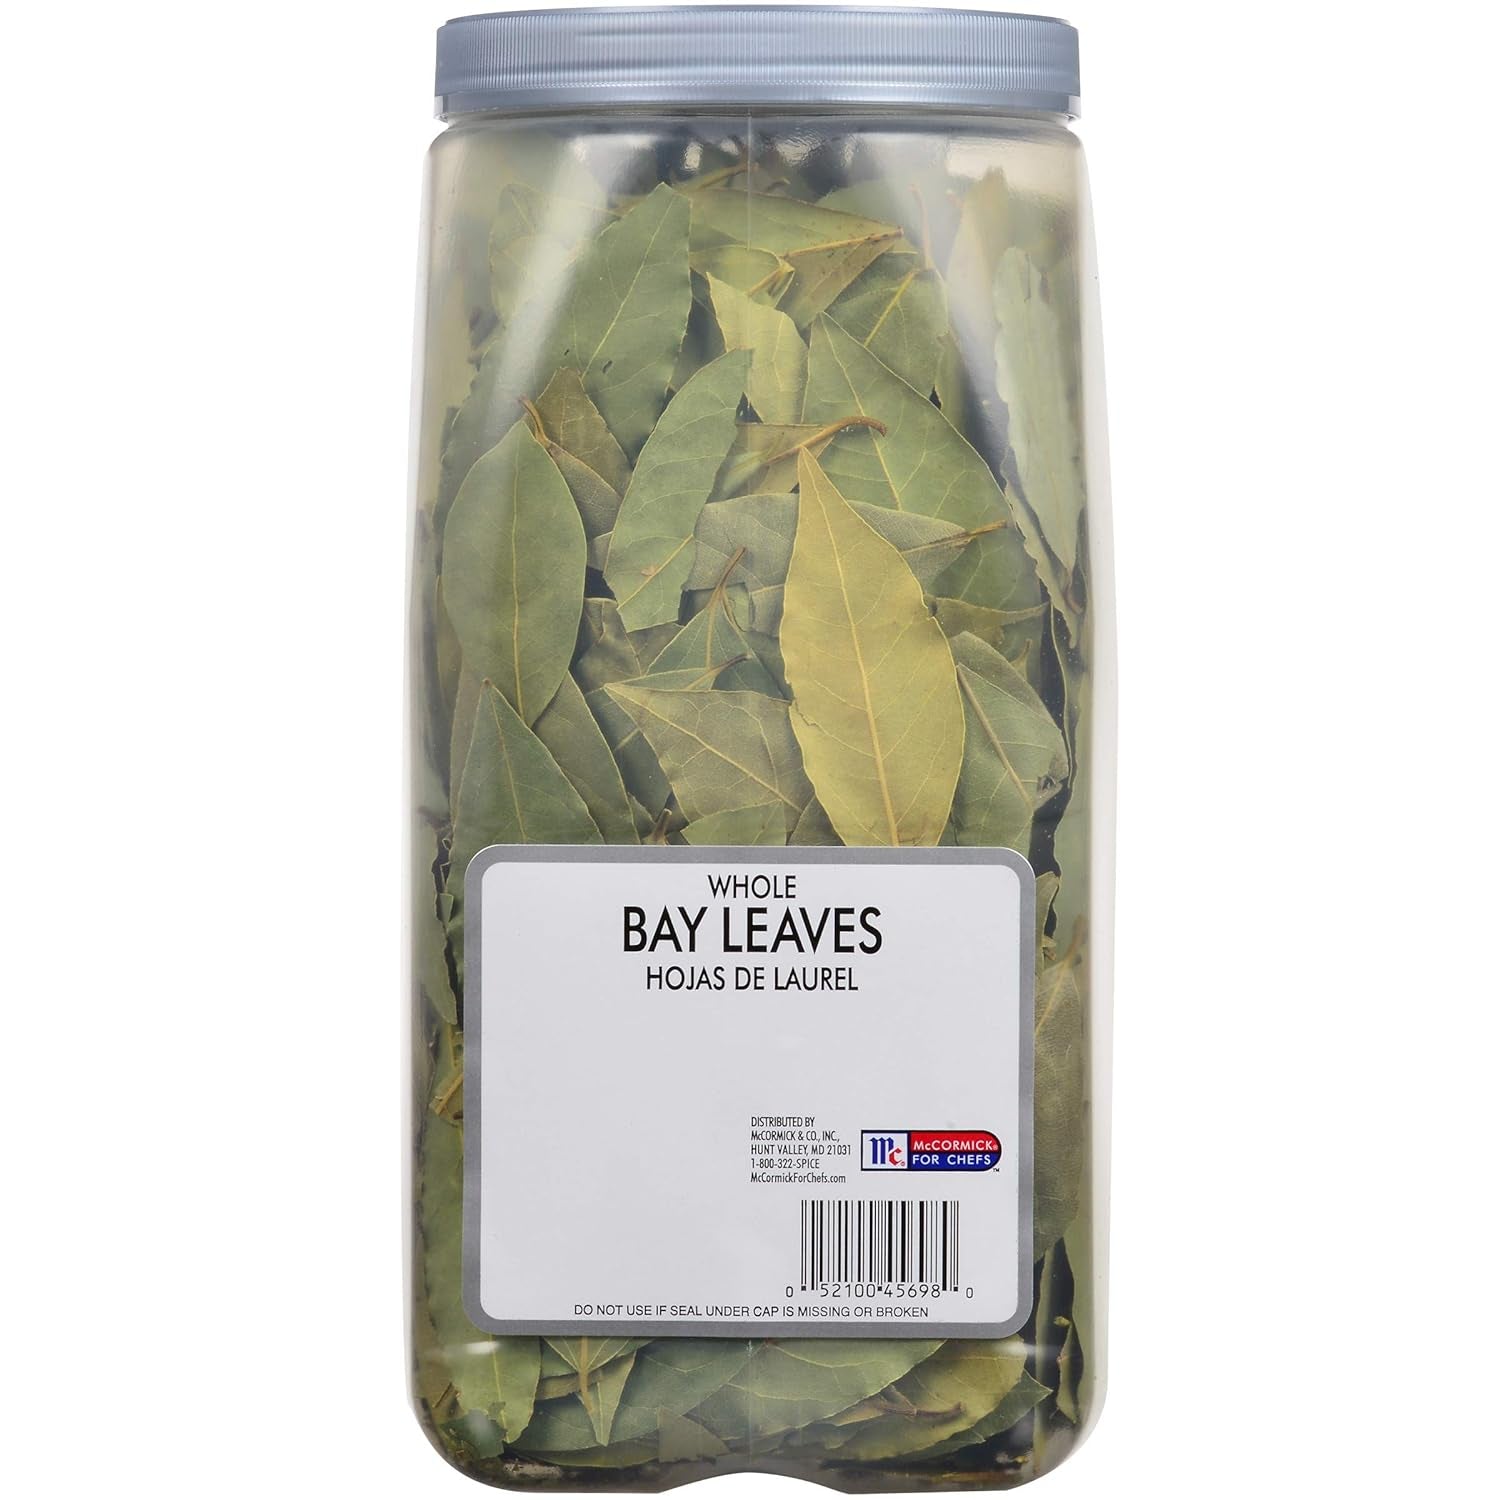 Whole Bay Leaves, 8 Oz - One 8 Ounce Container of Bulk Whole Bay Leaves for a Savory Floral Flavor, Perfect in Stews and Marinades